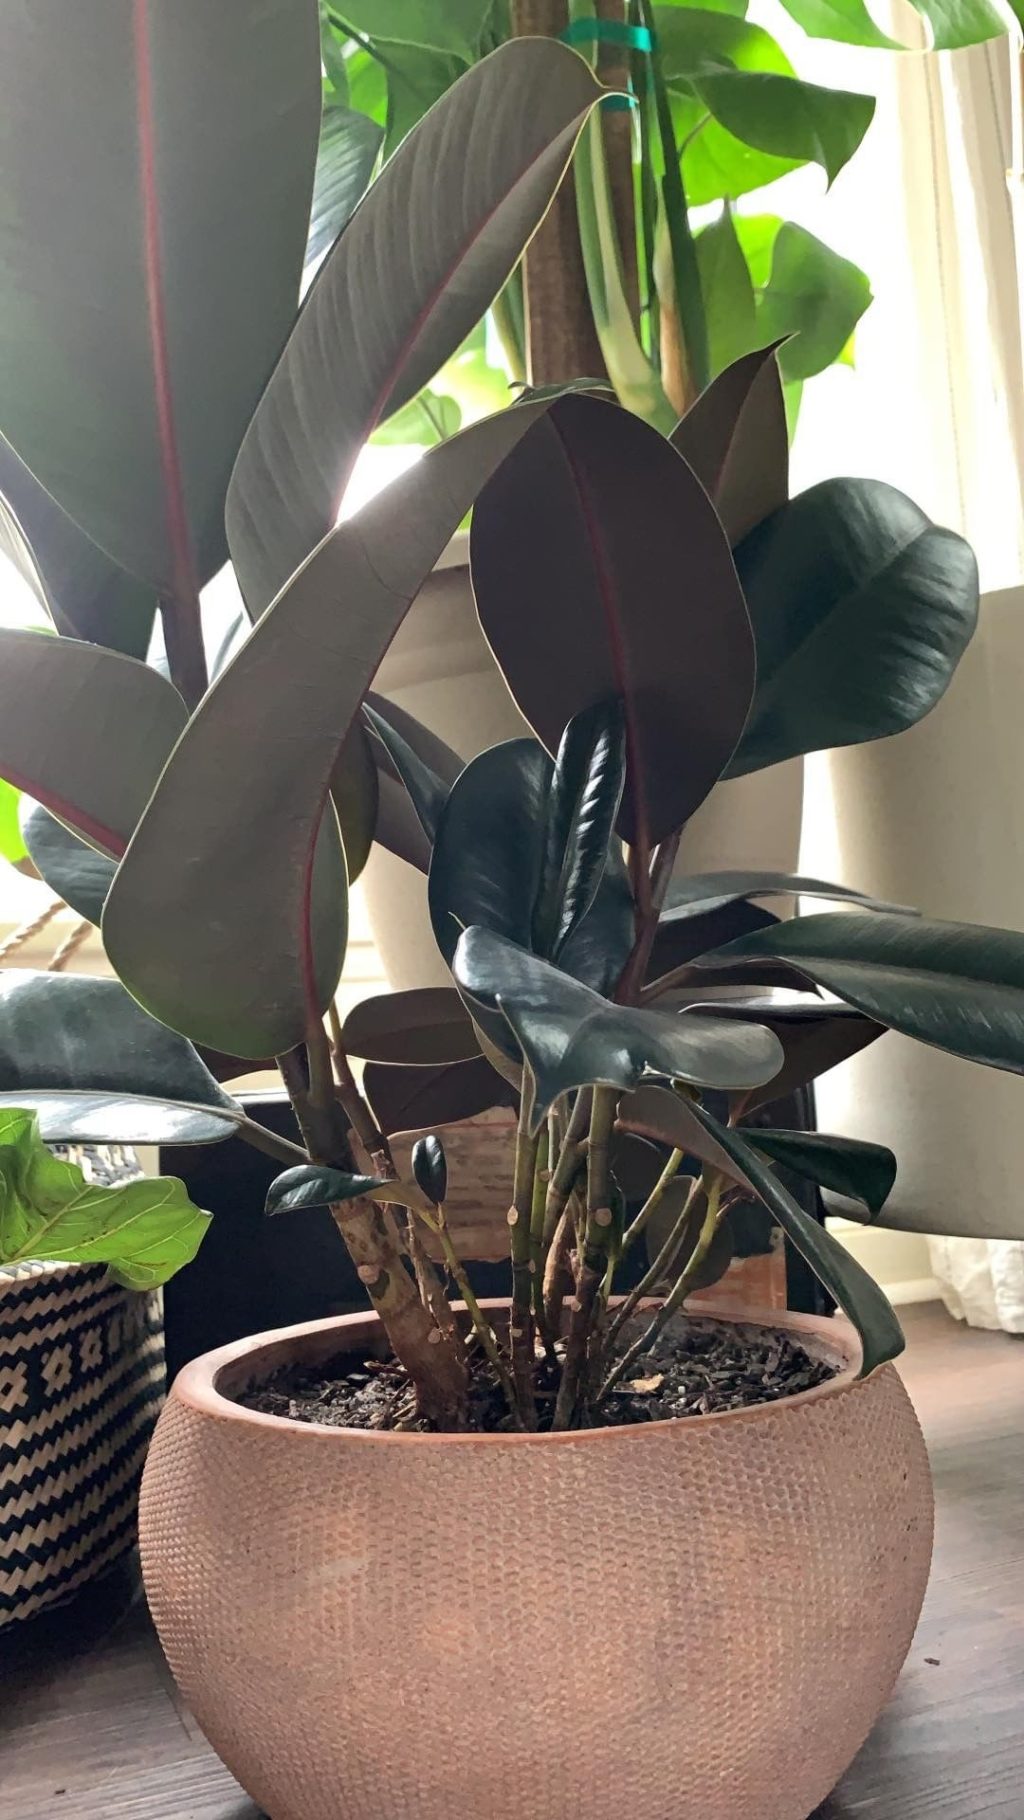 Full Rubber Plant with missing leaves on the bottom